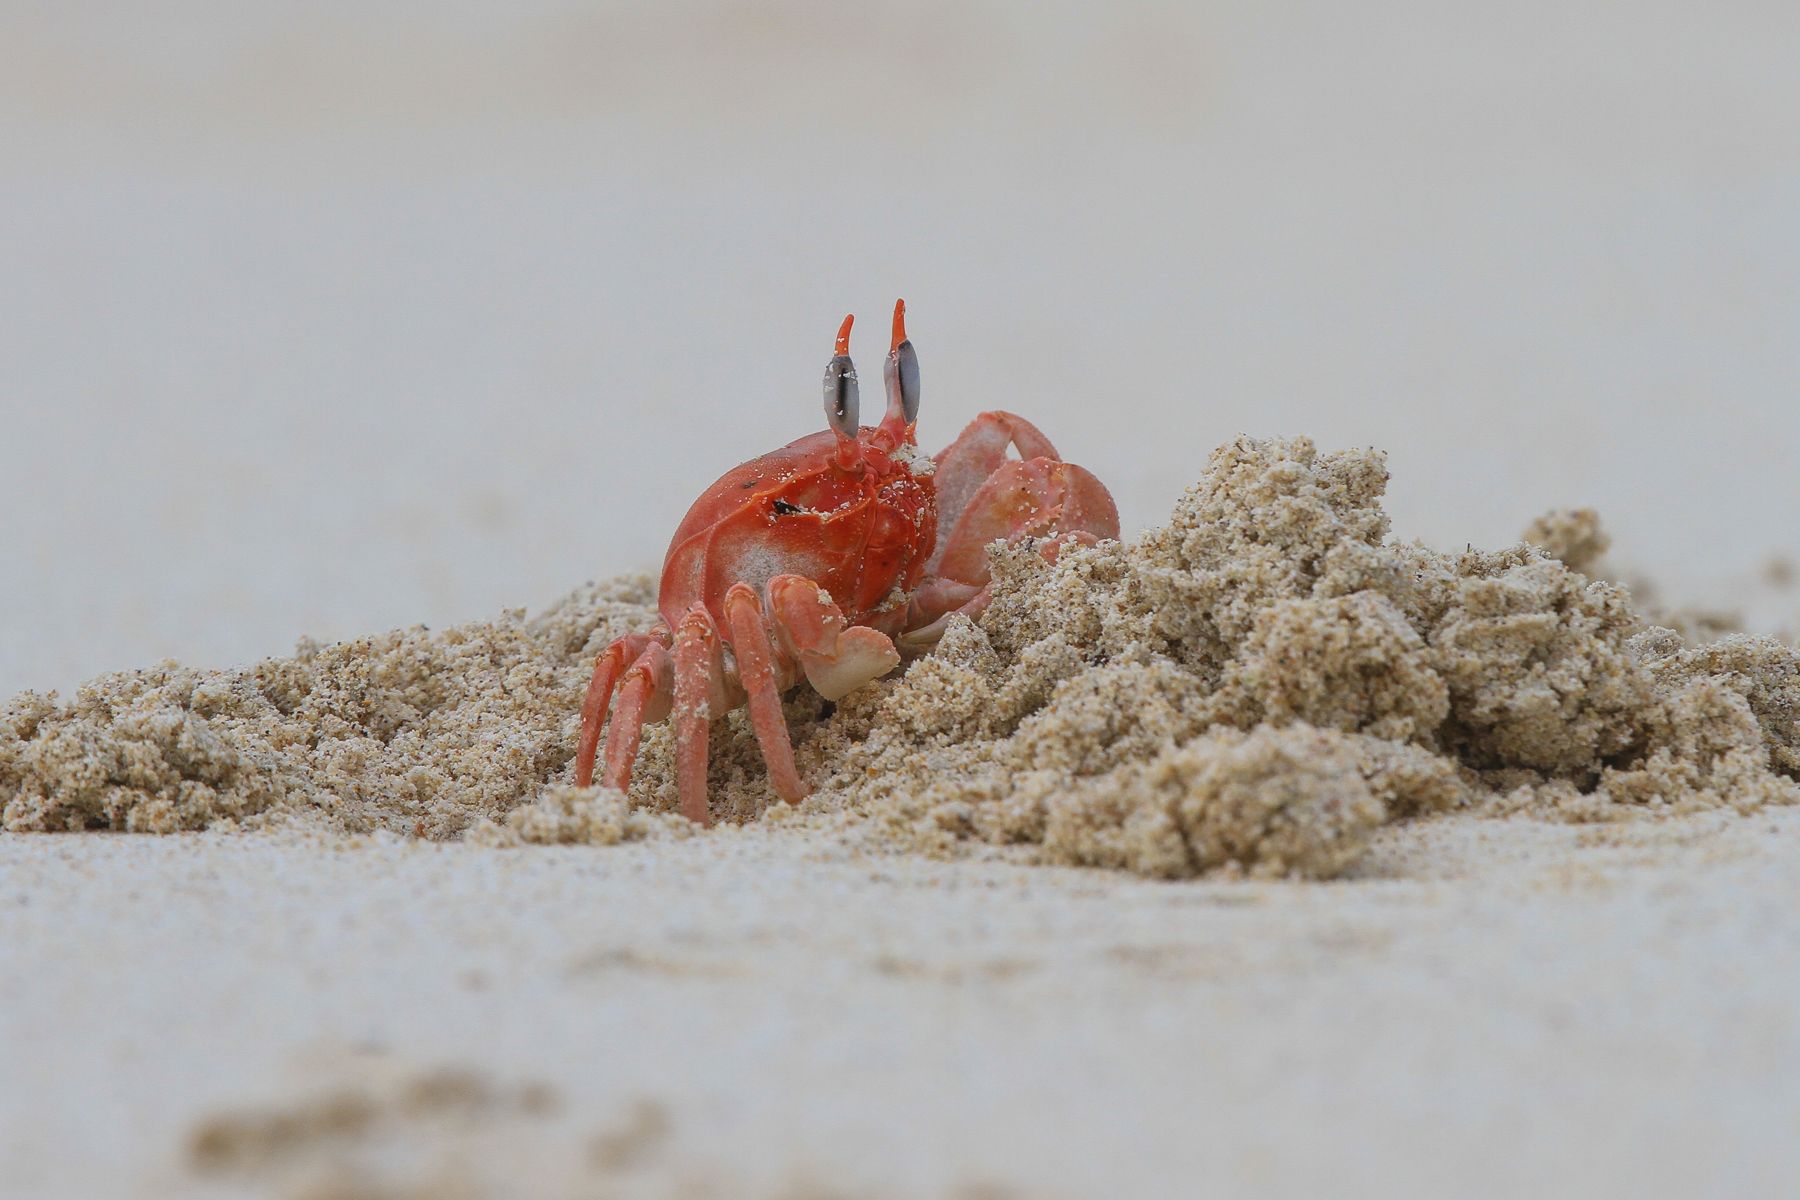 Down on the beach, ghost crabs dig new burrows